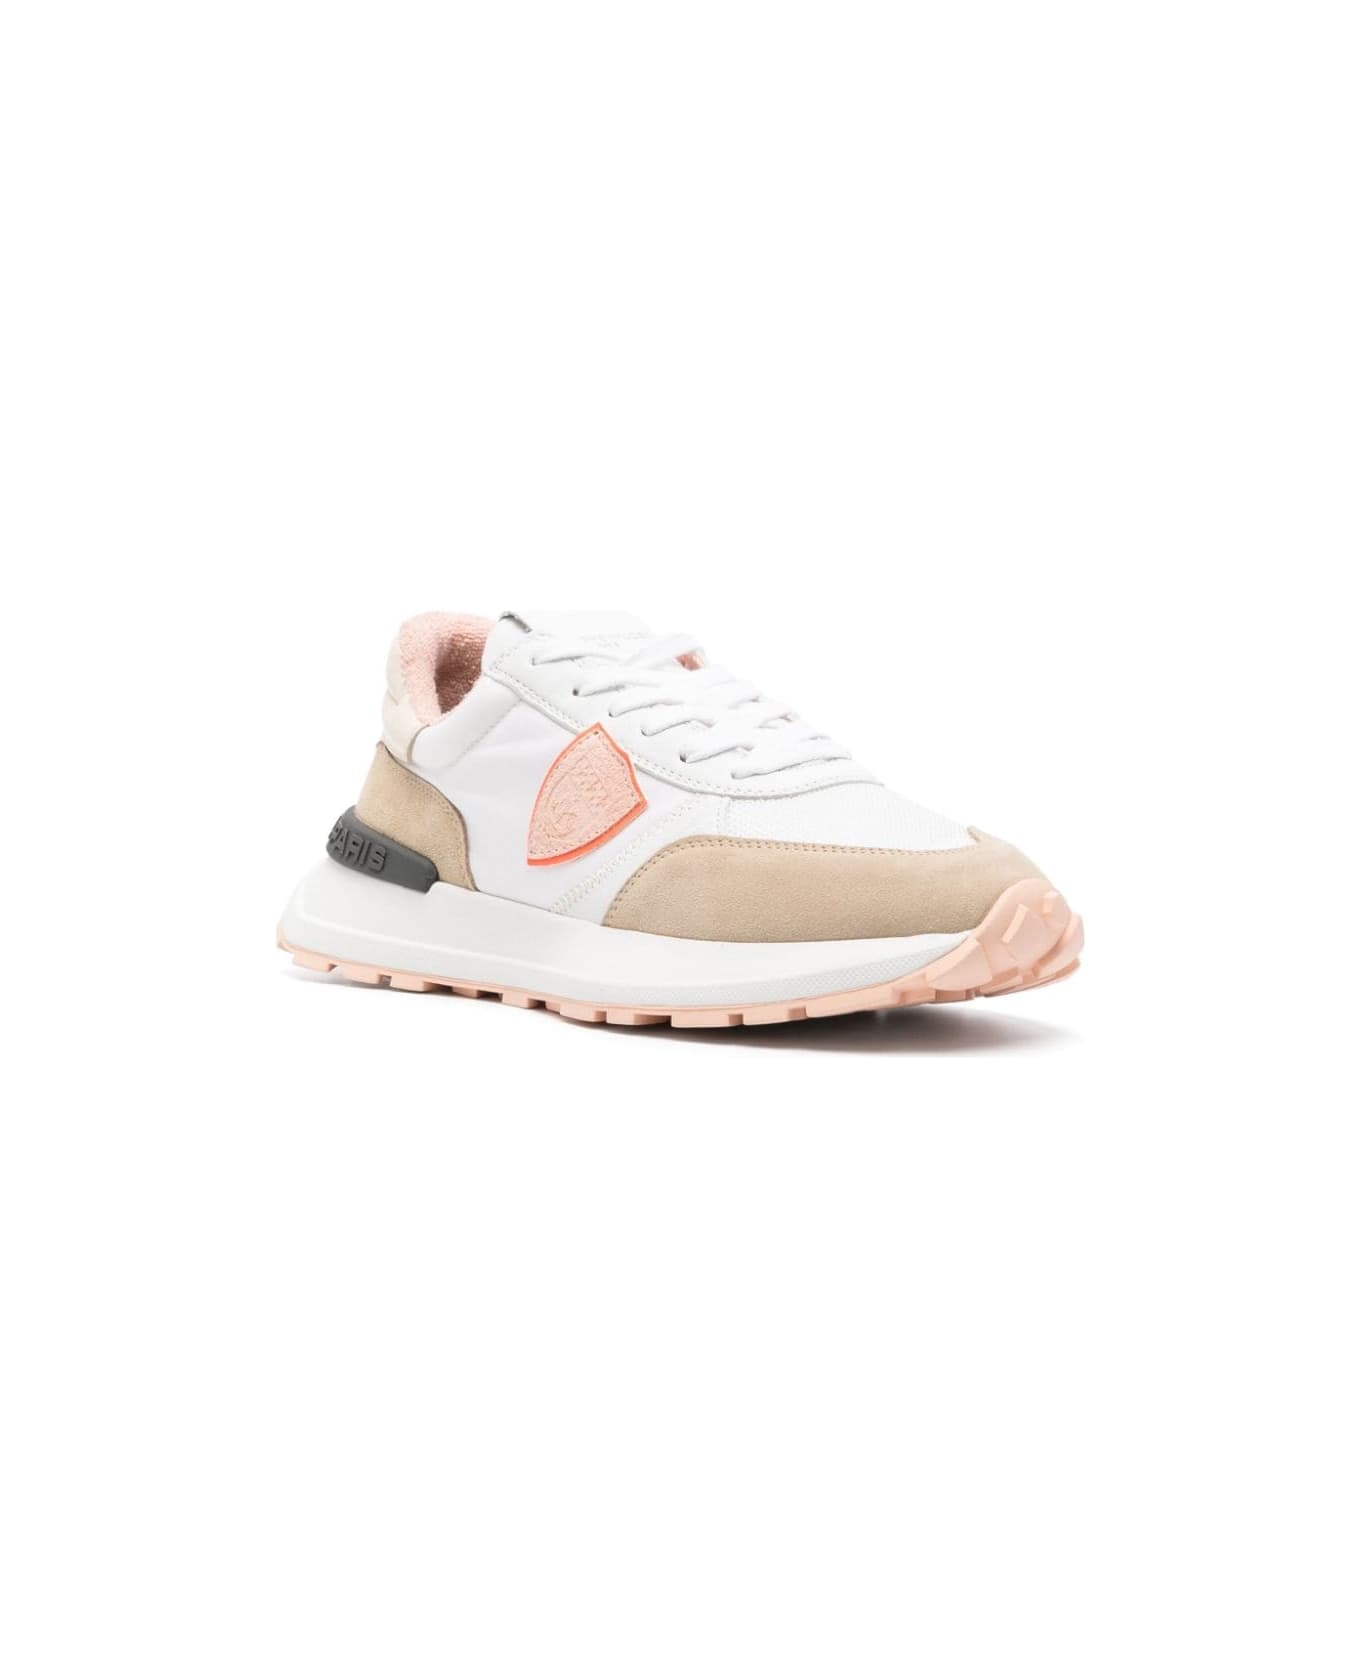 Philippe Model Running Antibes Sneakers - White And Pink - Multicolour スニーカー